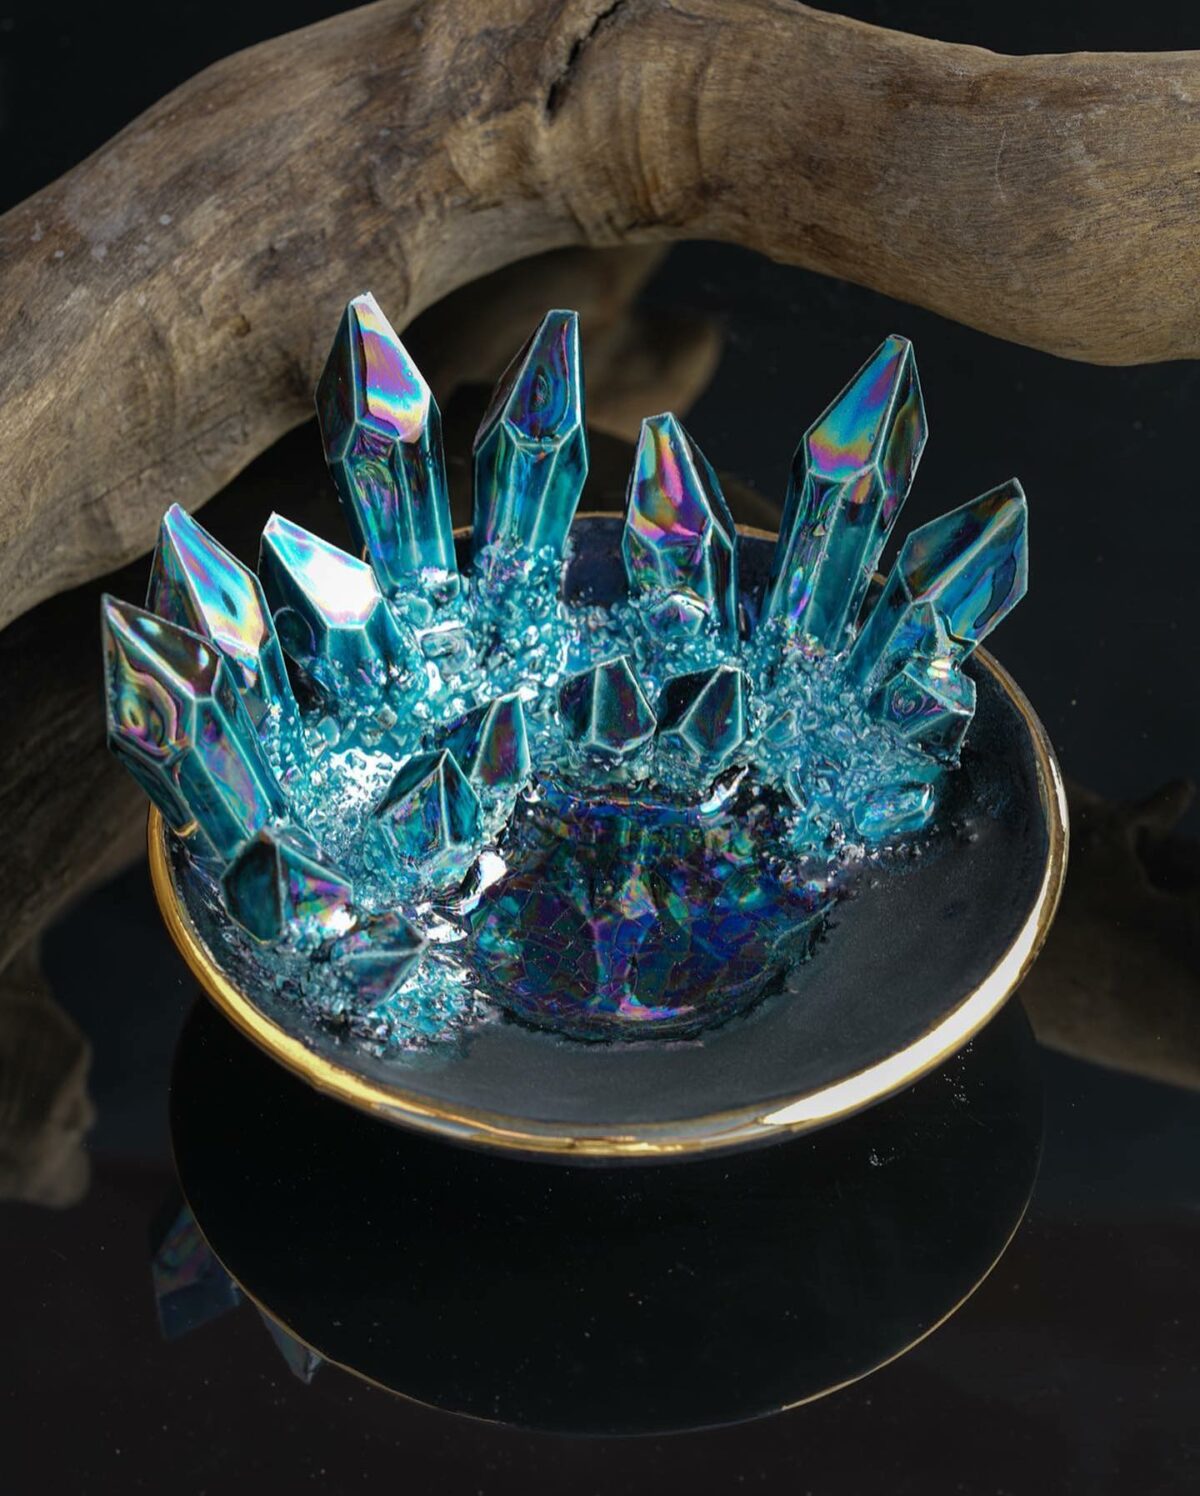 Lush Ceramic Vessels Decorated With Colorful Crystals By Collin Lynch 19 1